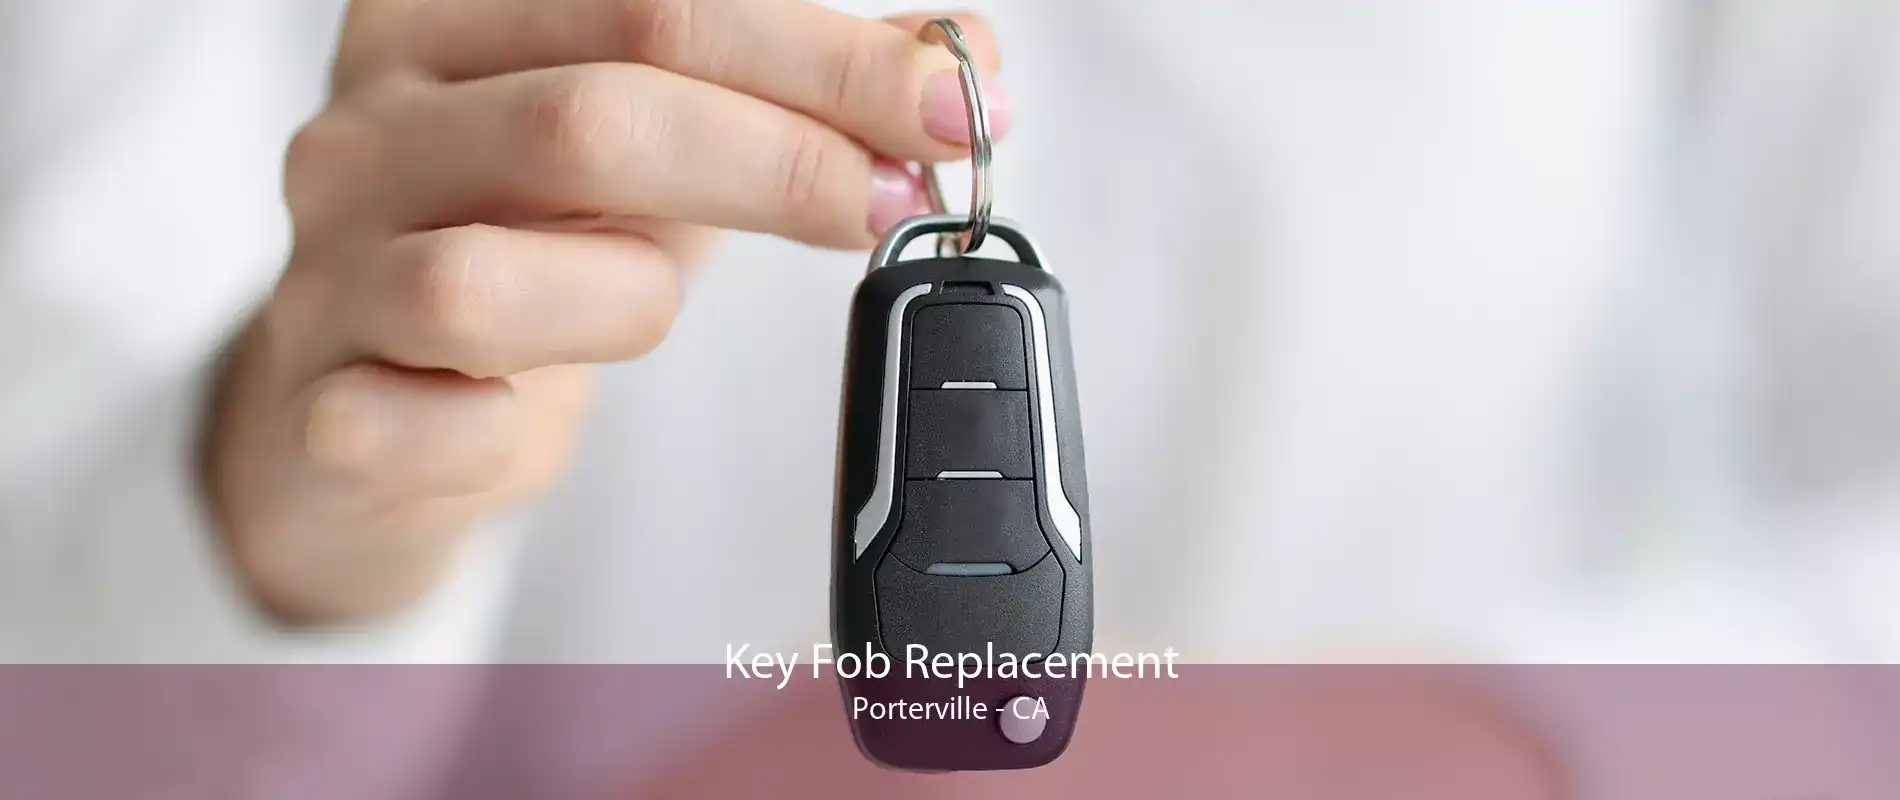 Key Fob Replacement Porterville - CA